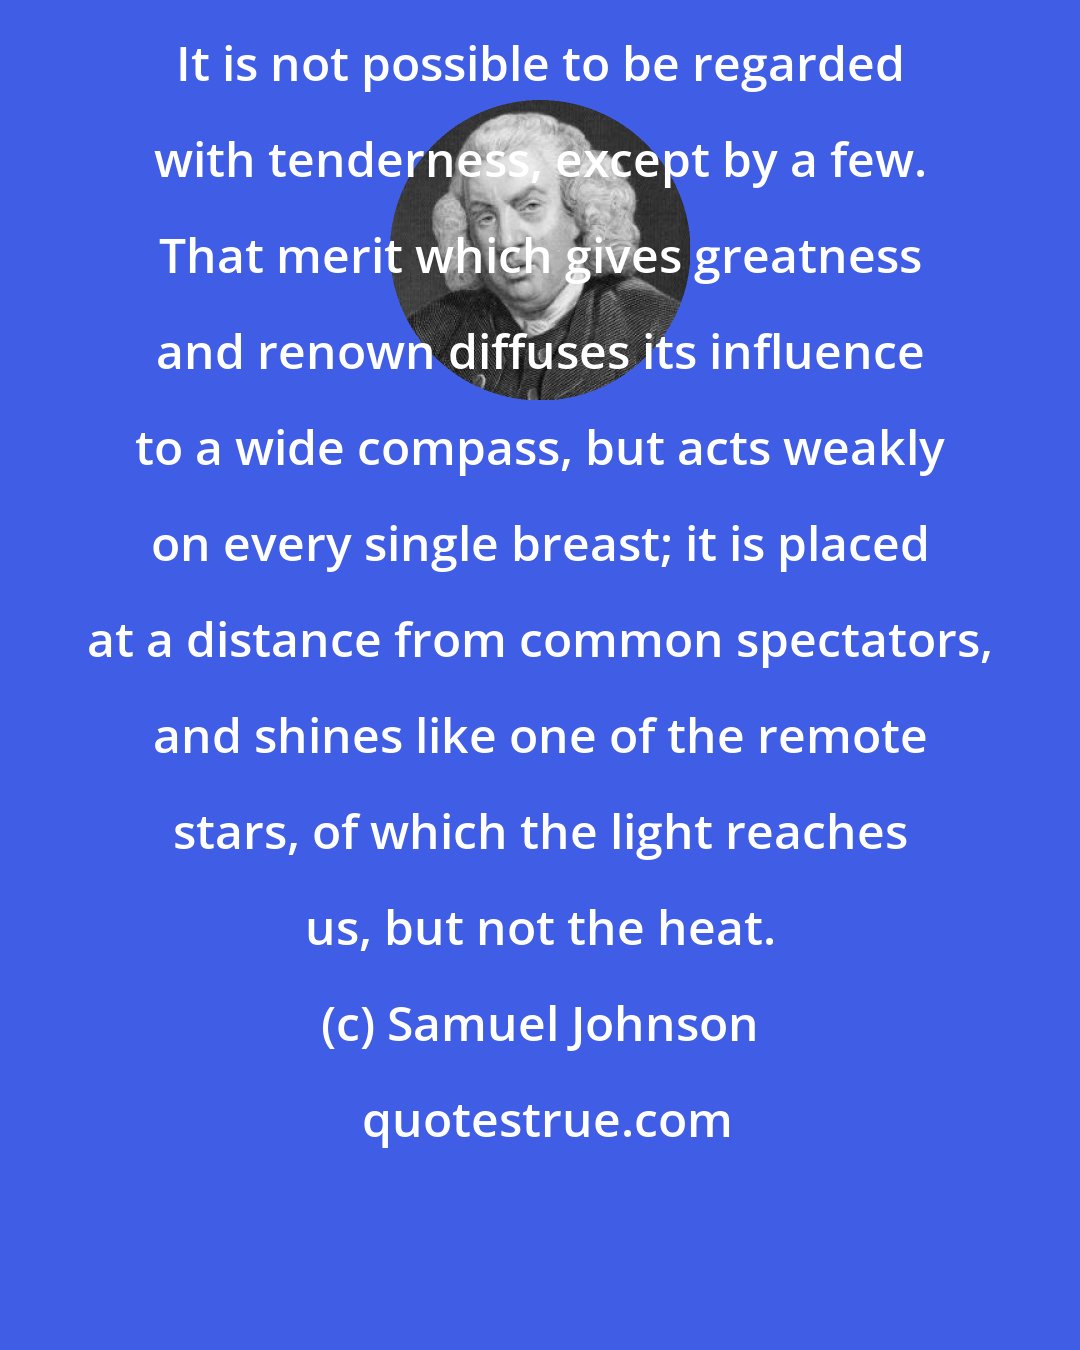 Samuel Johnson: It is not possible to be regarded with tenderness, except by a few. That merit which gives greatness and renown diffuses its influence to a wide compass, but acts weakly on every single breast; it is placed at a distance from common spectators, and shines like one of the remote stars, of which the light reaches us, but not the heat.